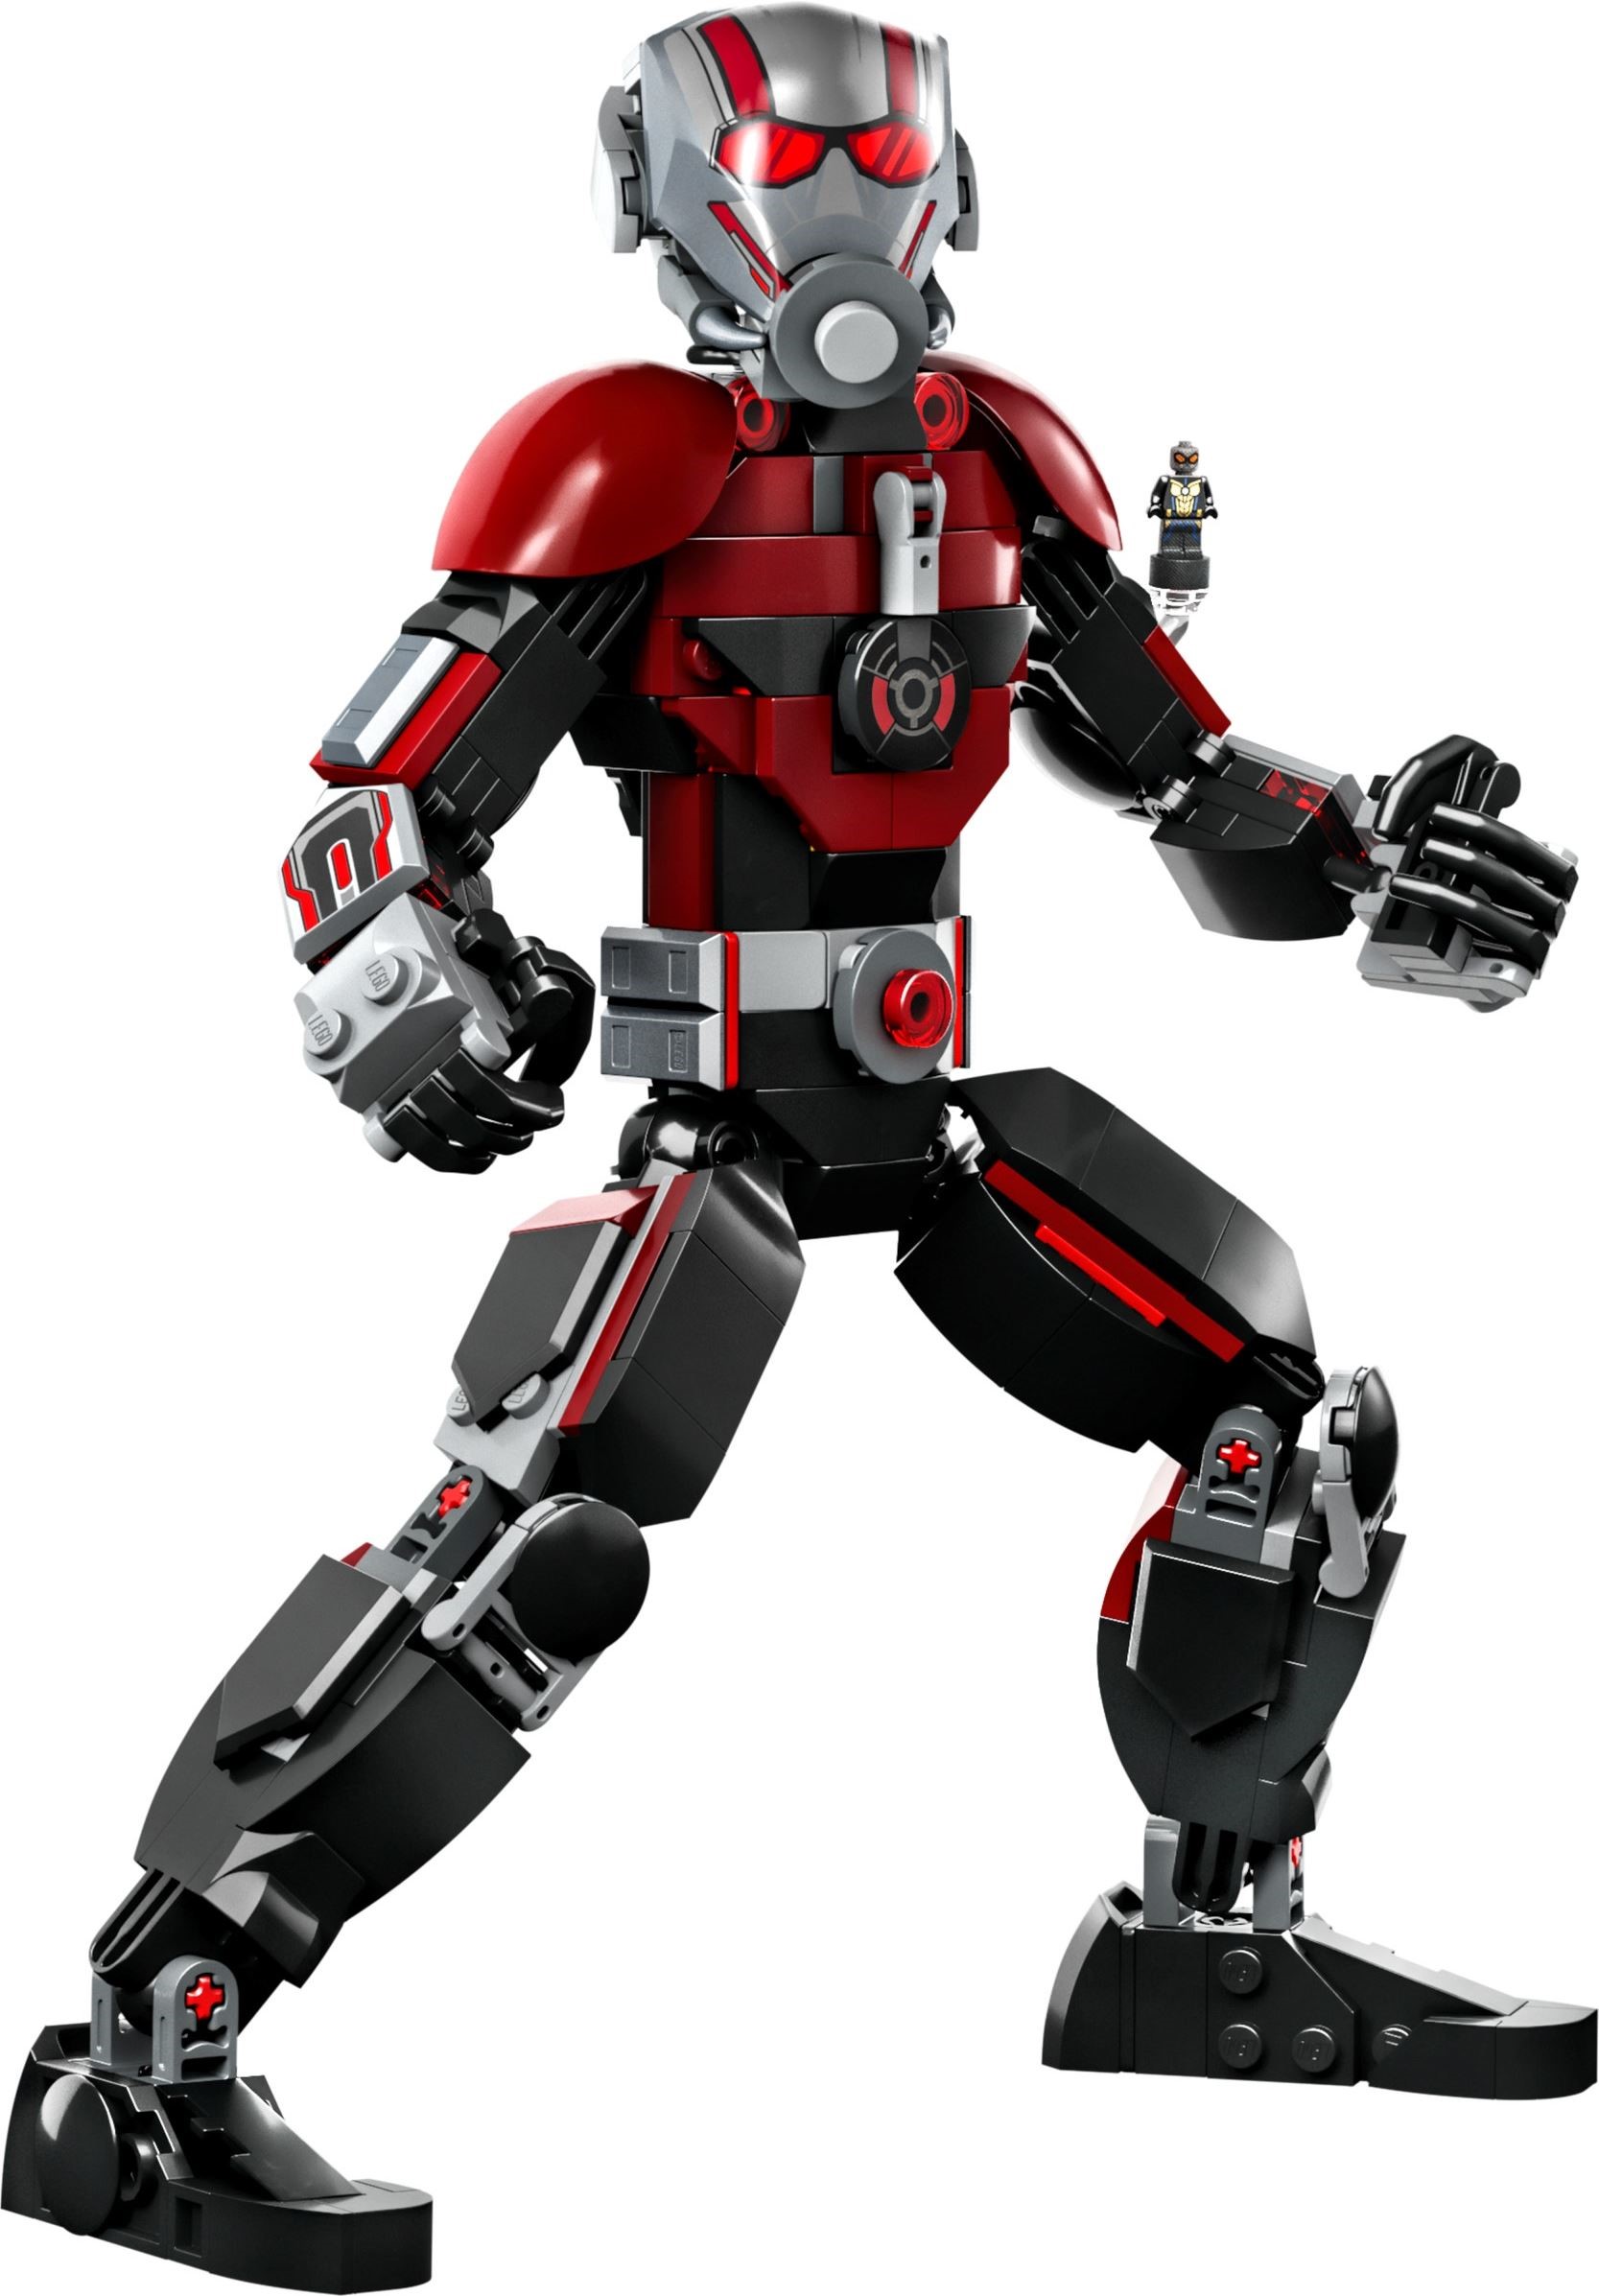 76256 Antman Ant-Man Construction Figure Officially Revealed | New for May 1, 2023